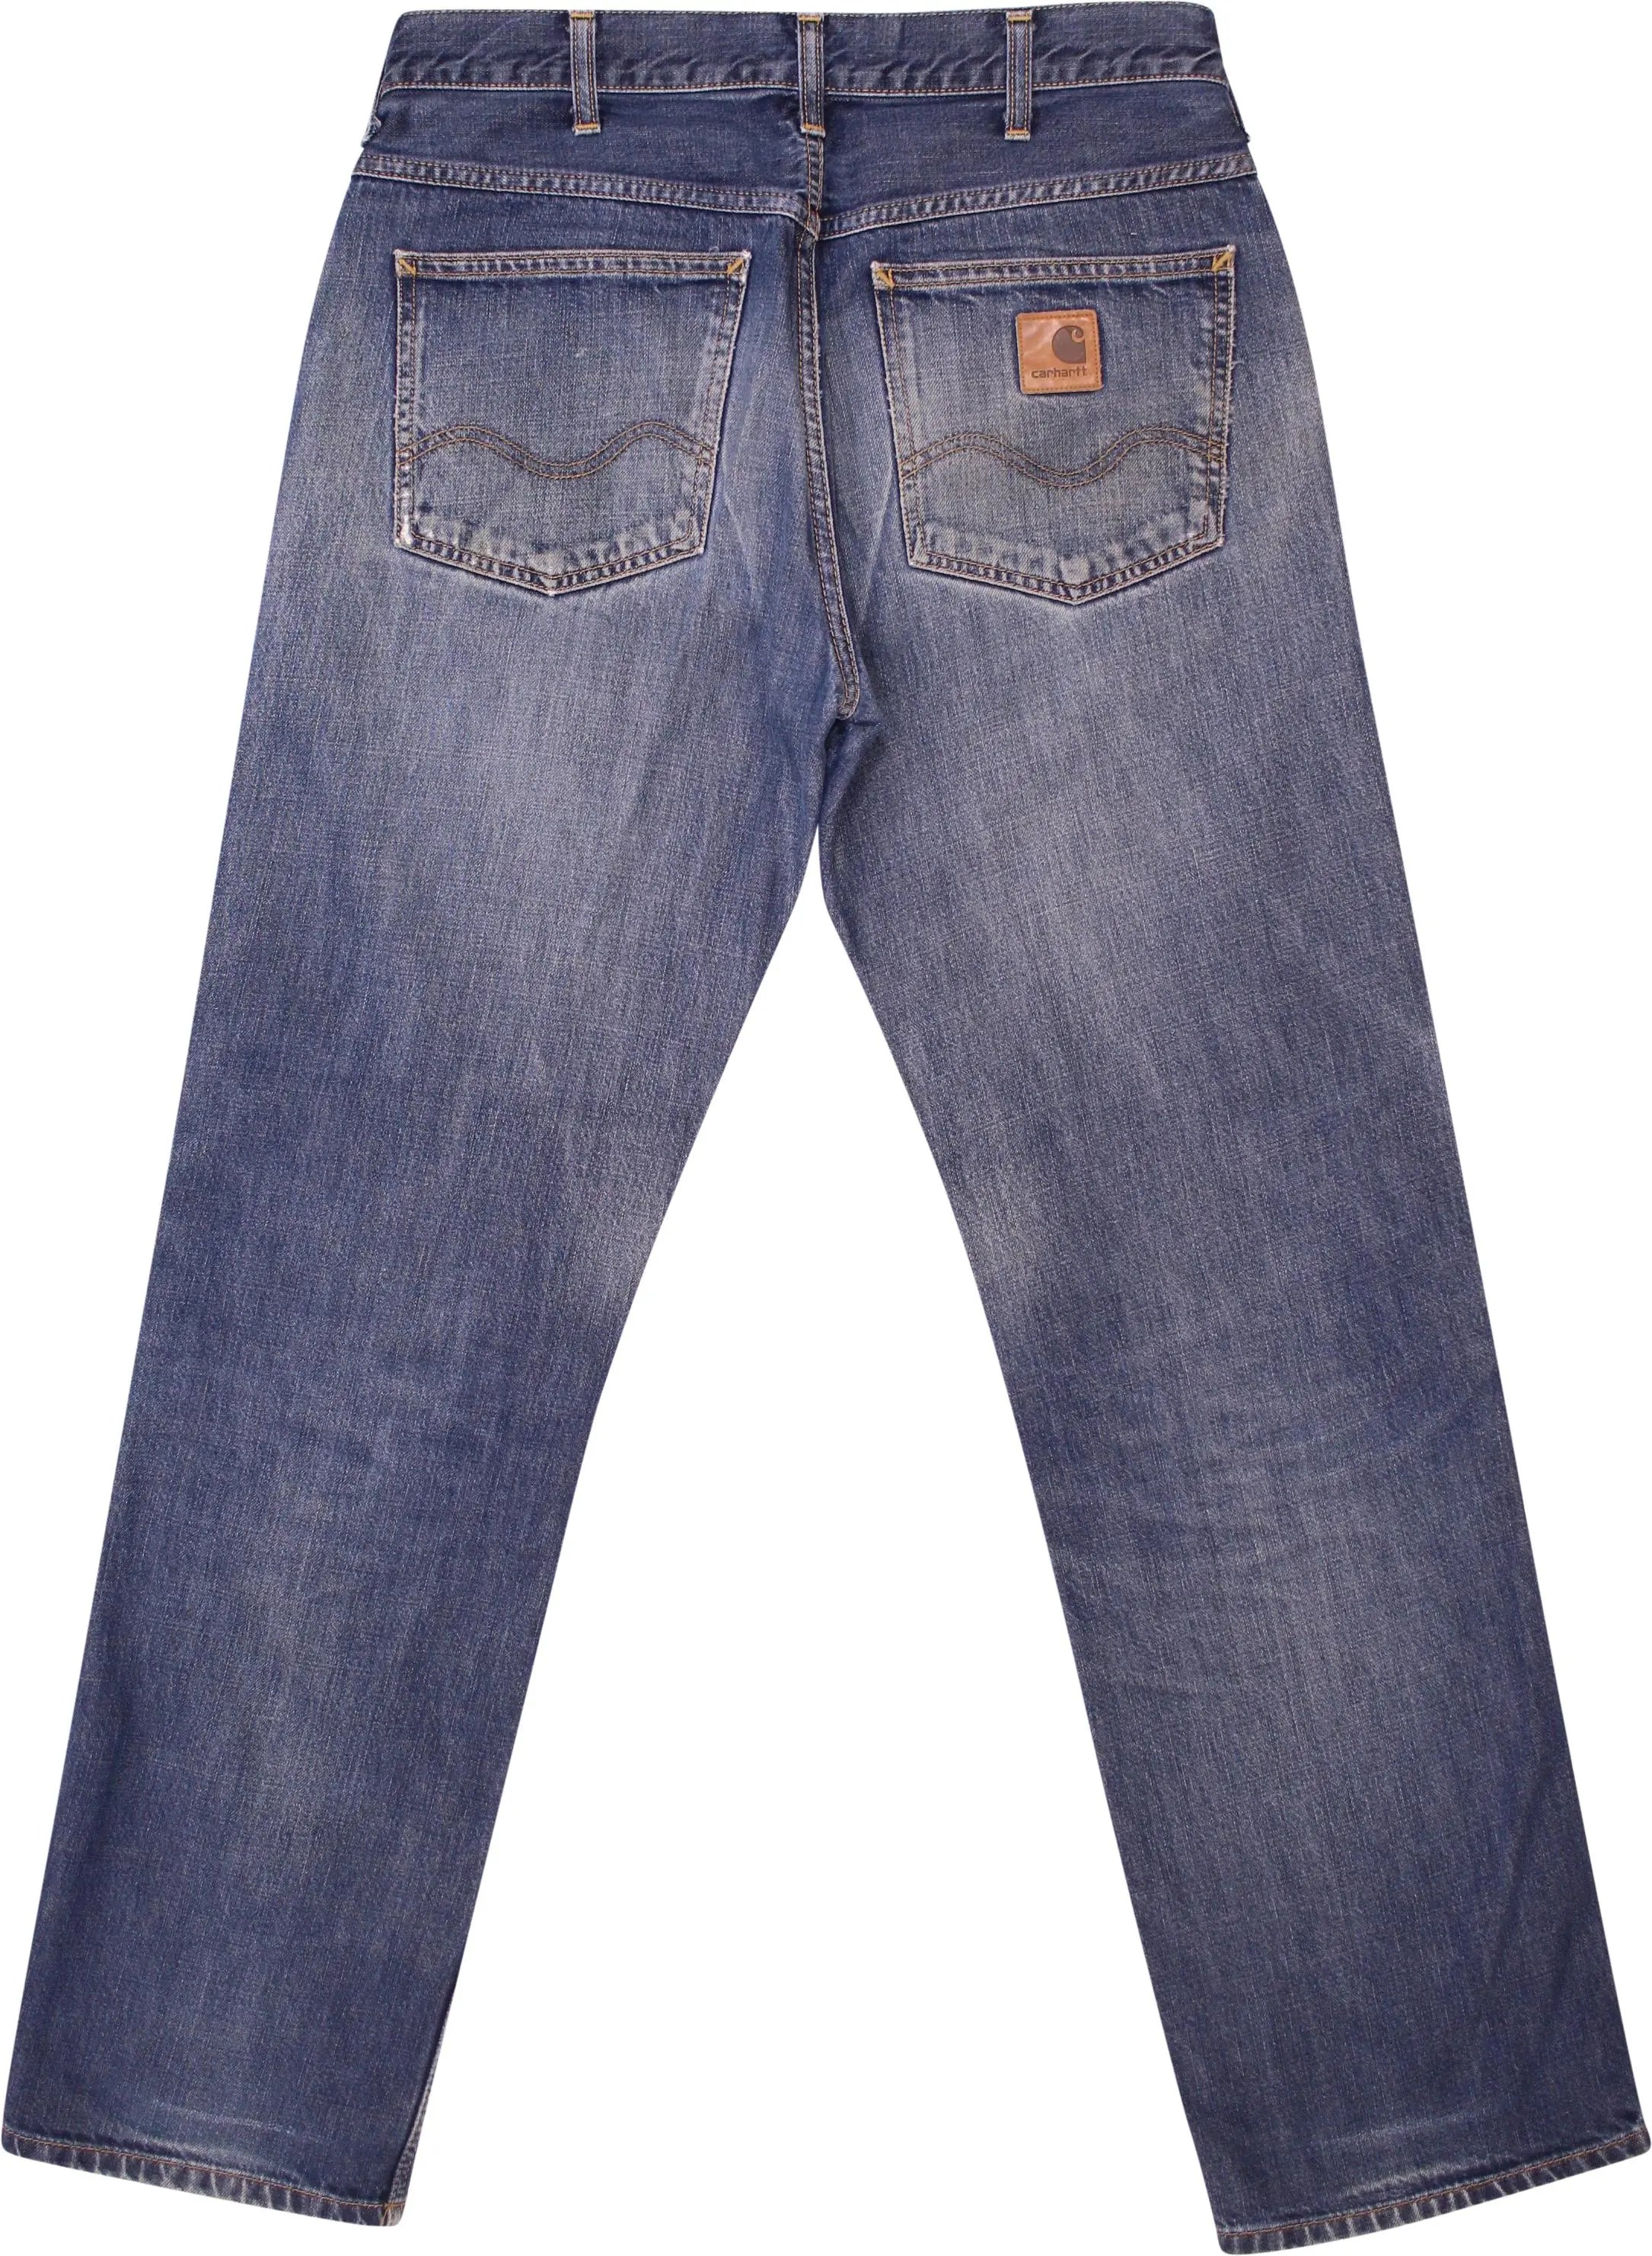 Carhartt - Regular Jeans by Carhartt- ThriftTale.com - Vintage and second handclothing